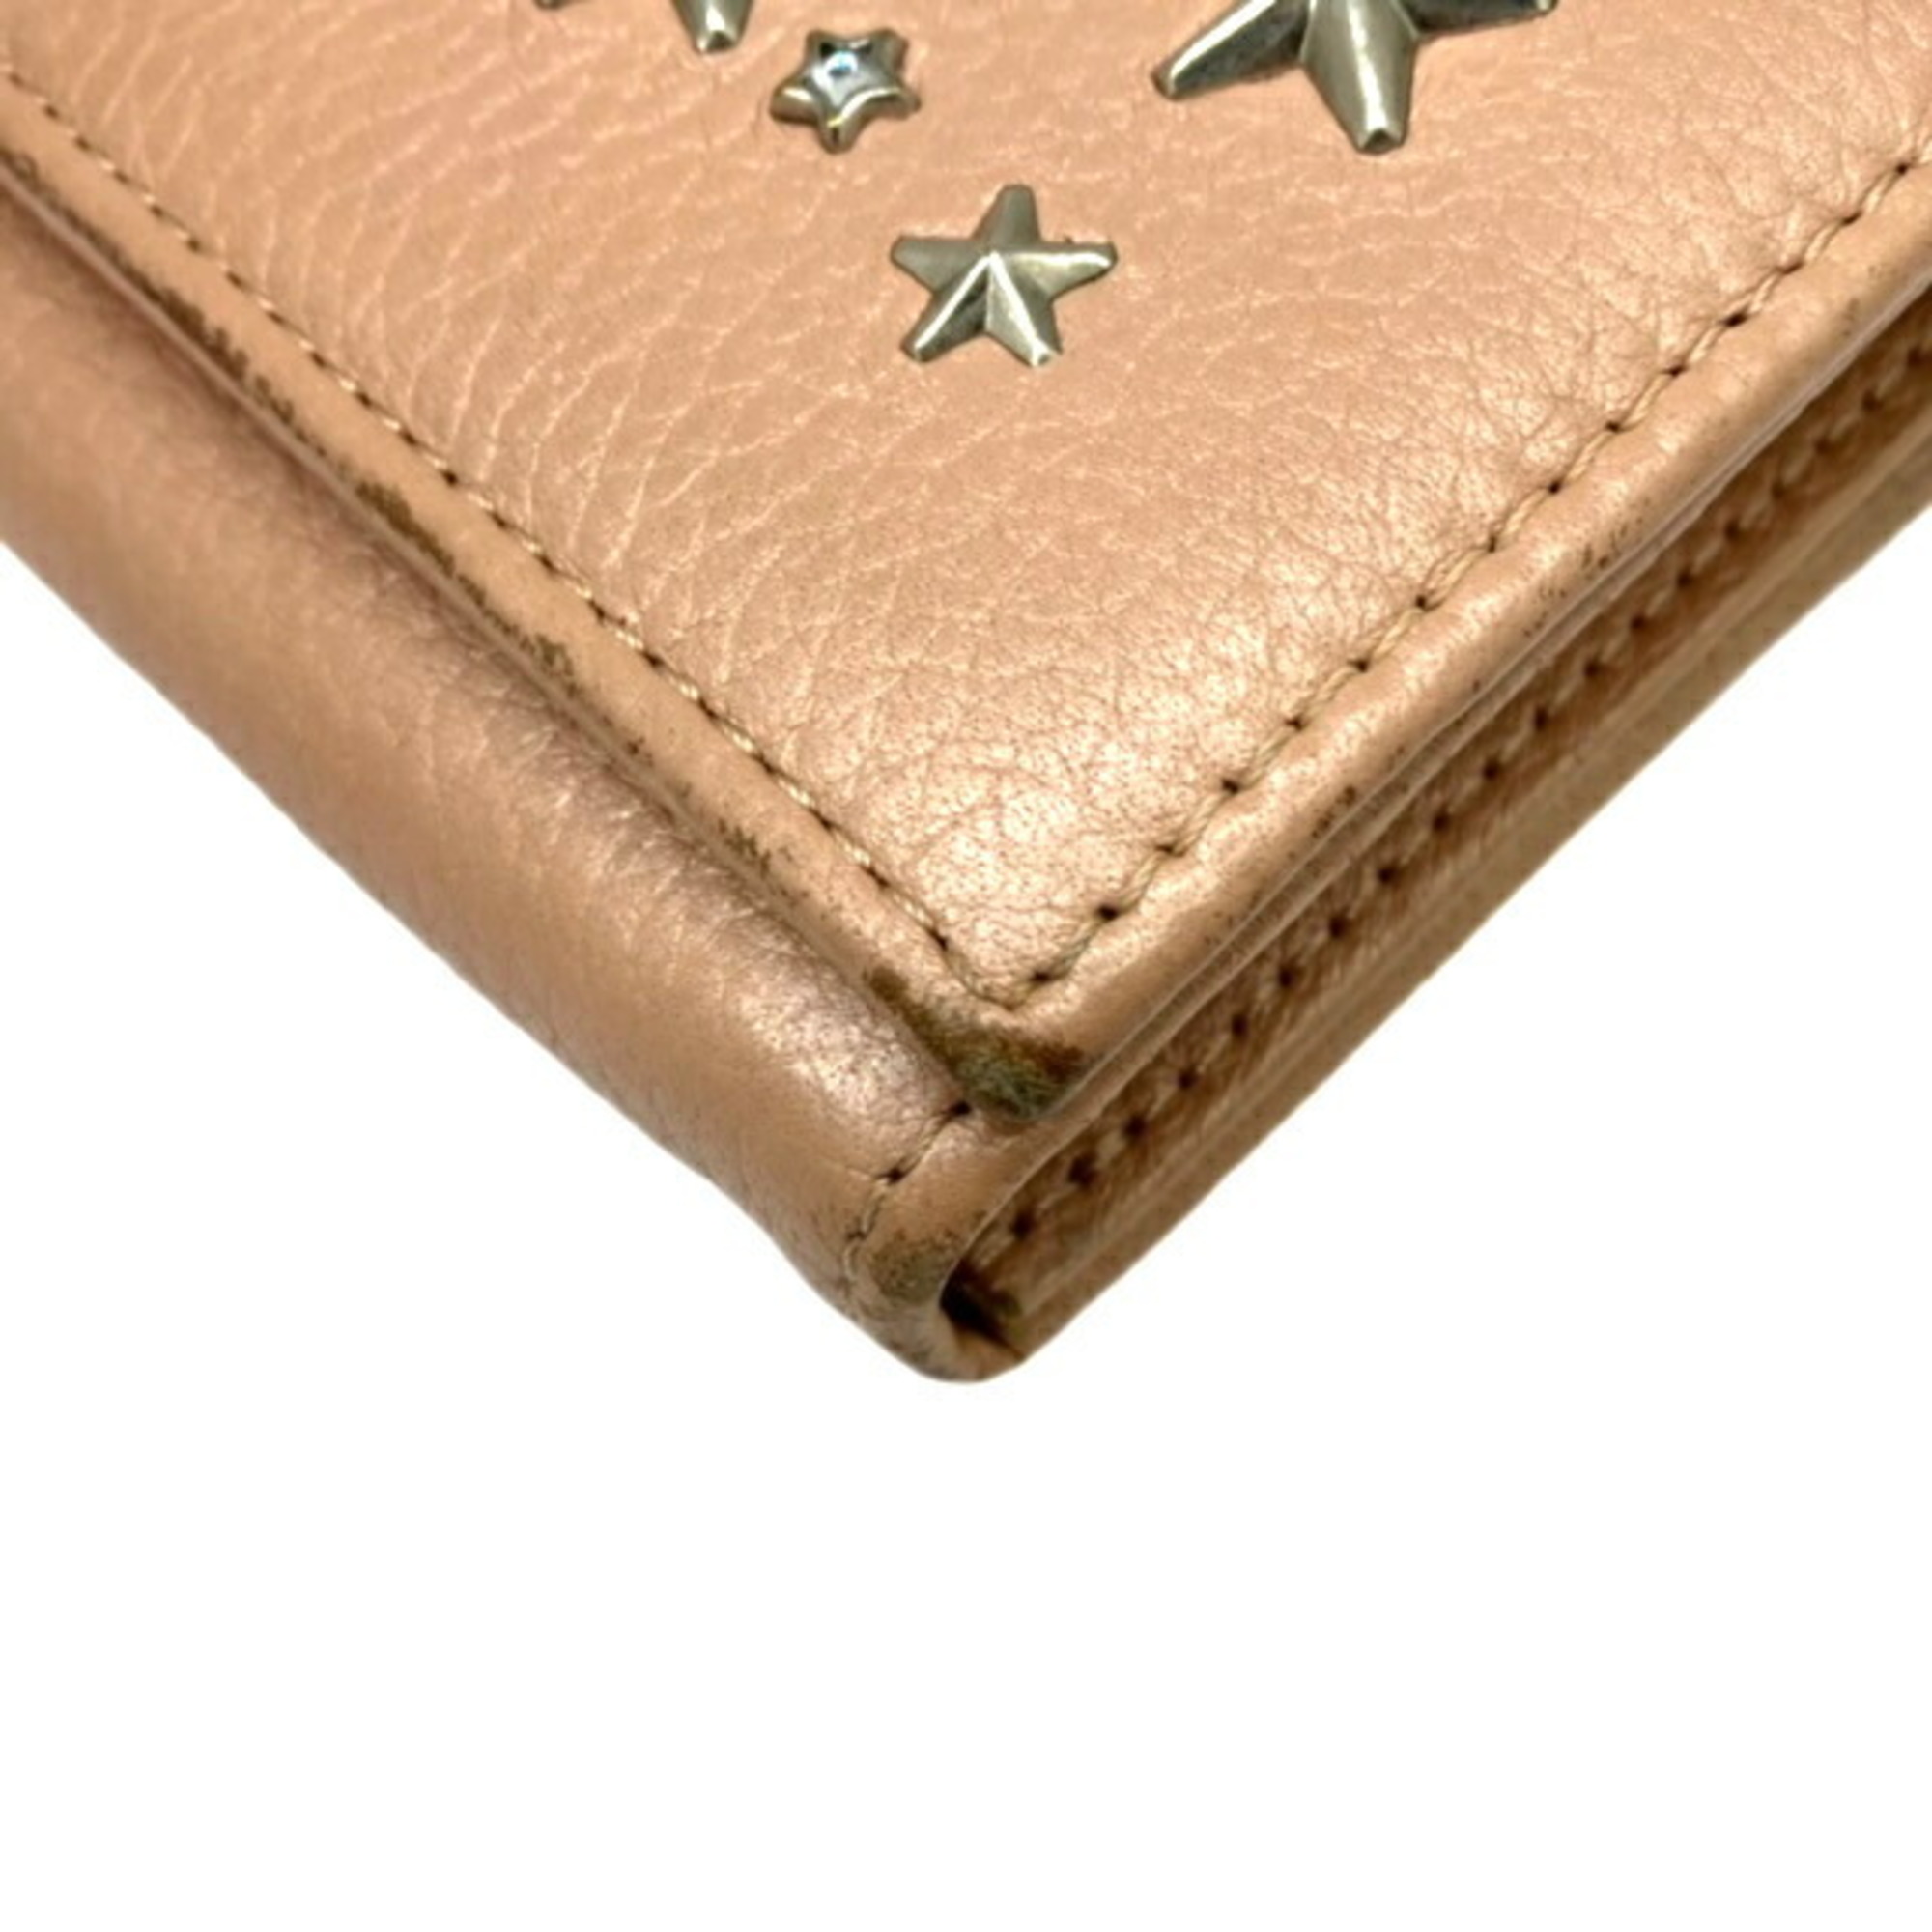 JIMMY CHOO Jimmy Choo Chain Wallet Star Studded Silver Pink Leather Shoulder L-shaped Flap Ladies